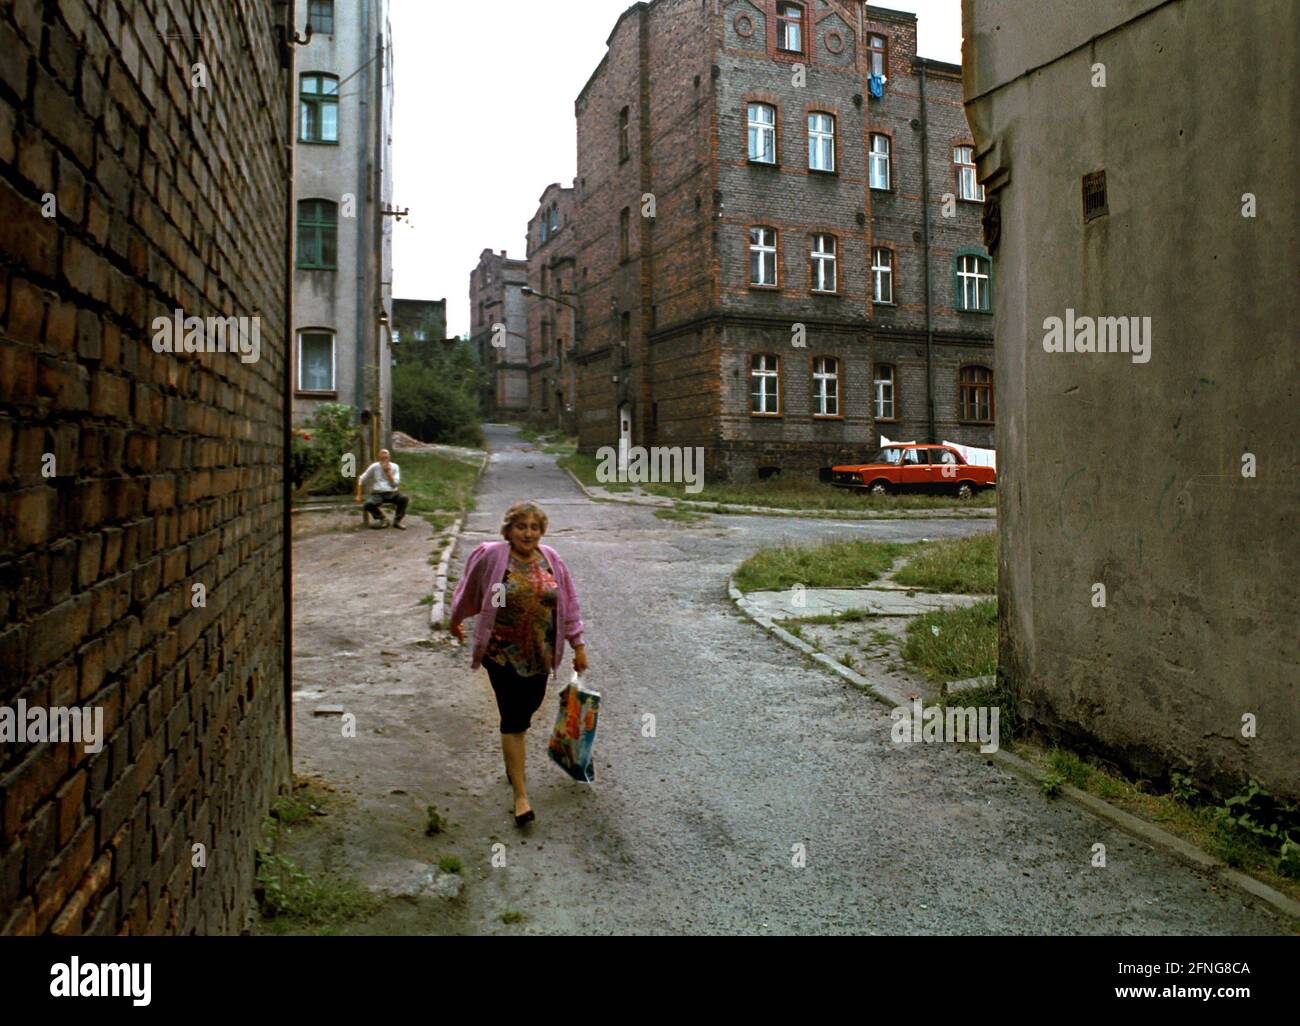 Poland / PL / Upper Silesia / Housing-Renting / 1993 housing estate of the Katowice colliery in Katowice // Housing / Tenants / Brick / Workers' housing estate / [automated translation] Stock Photo